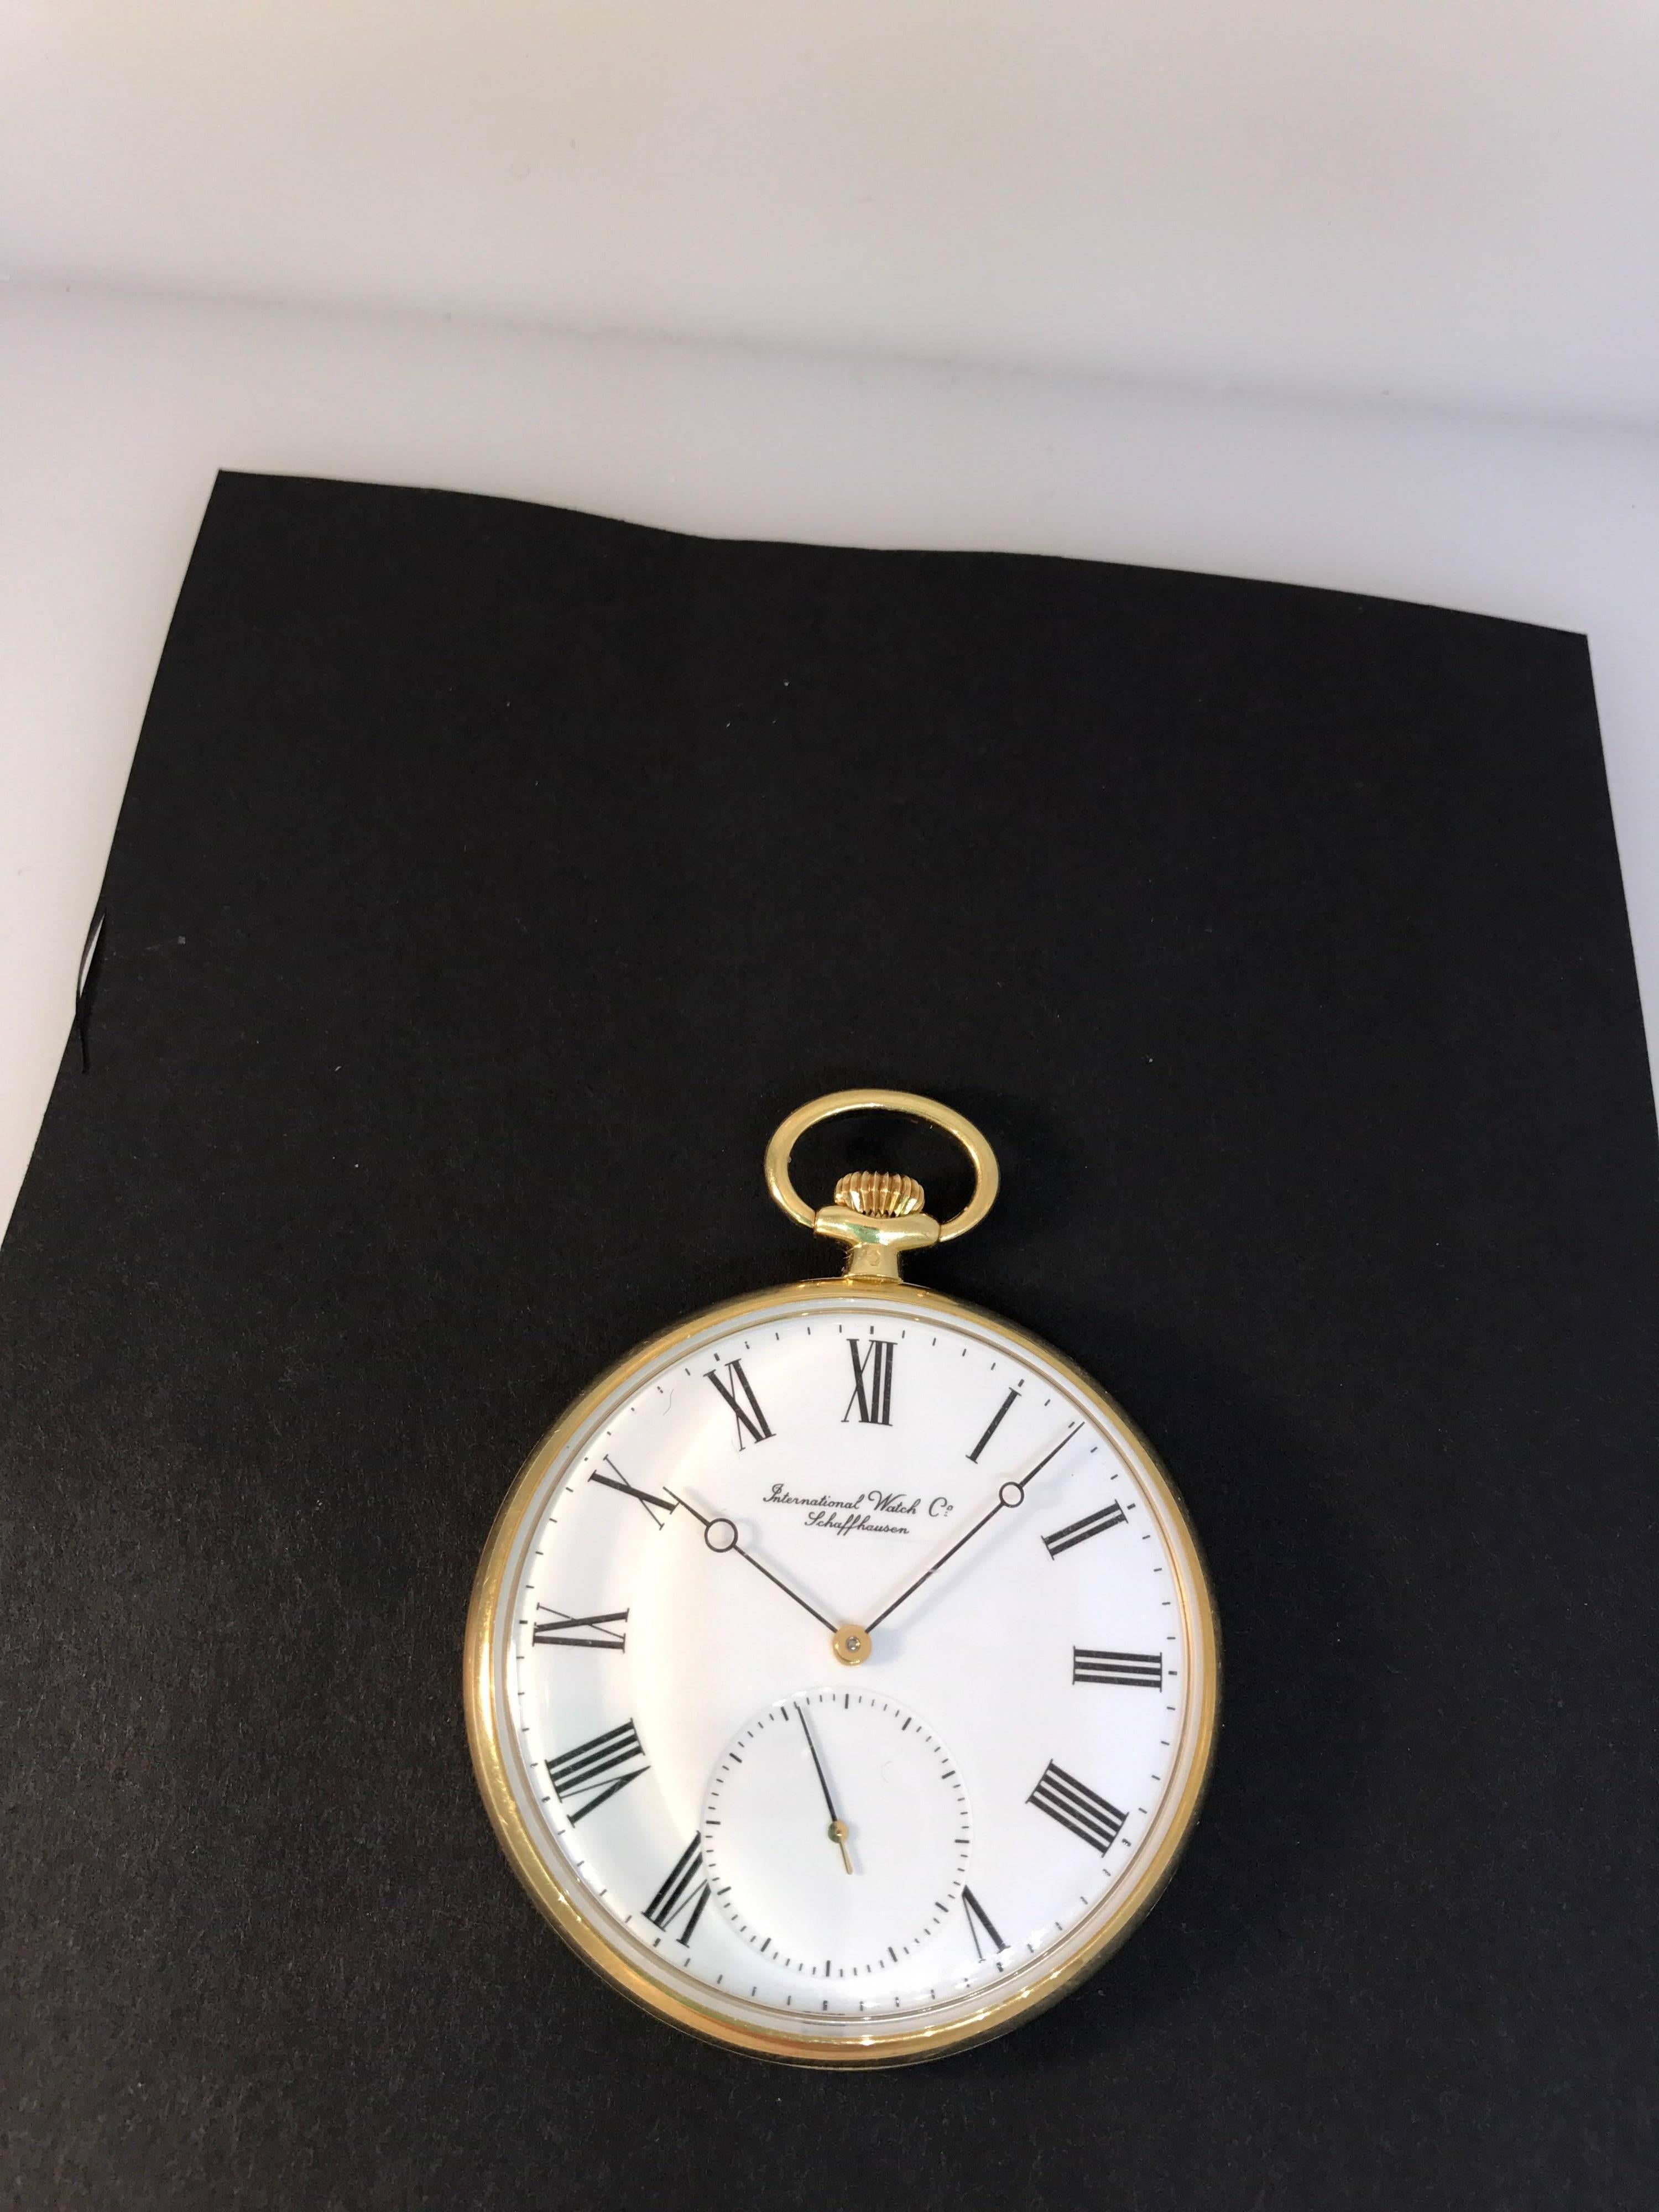 IWC Schaffhausen Lepine Pocket Watch

Model Number: 5201-001

100% Authentic

New / Old Stock

Comes with original IWC Schaffhausen Box

18 Karat Yellow Gold

White Dial

Mechanical Manual Wind Movement

Retails for $8,700